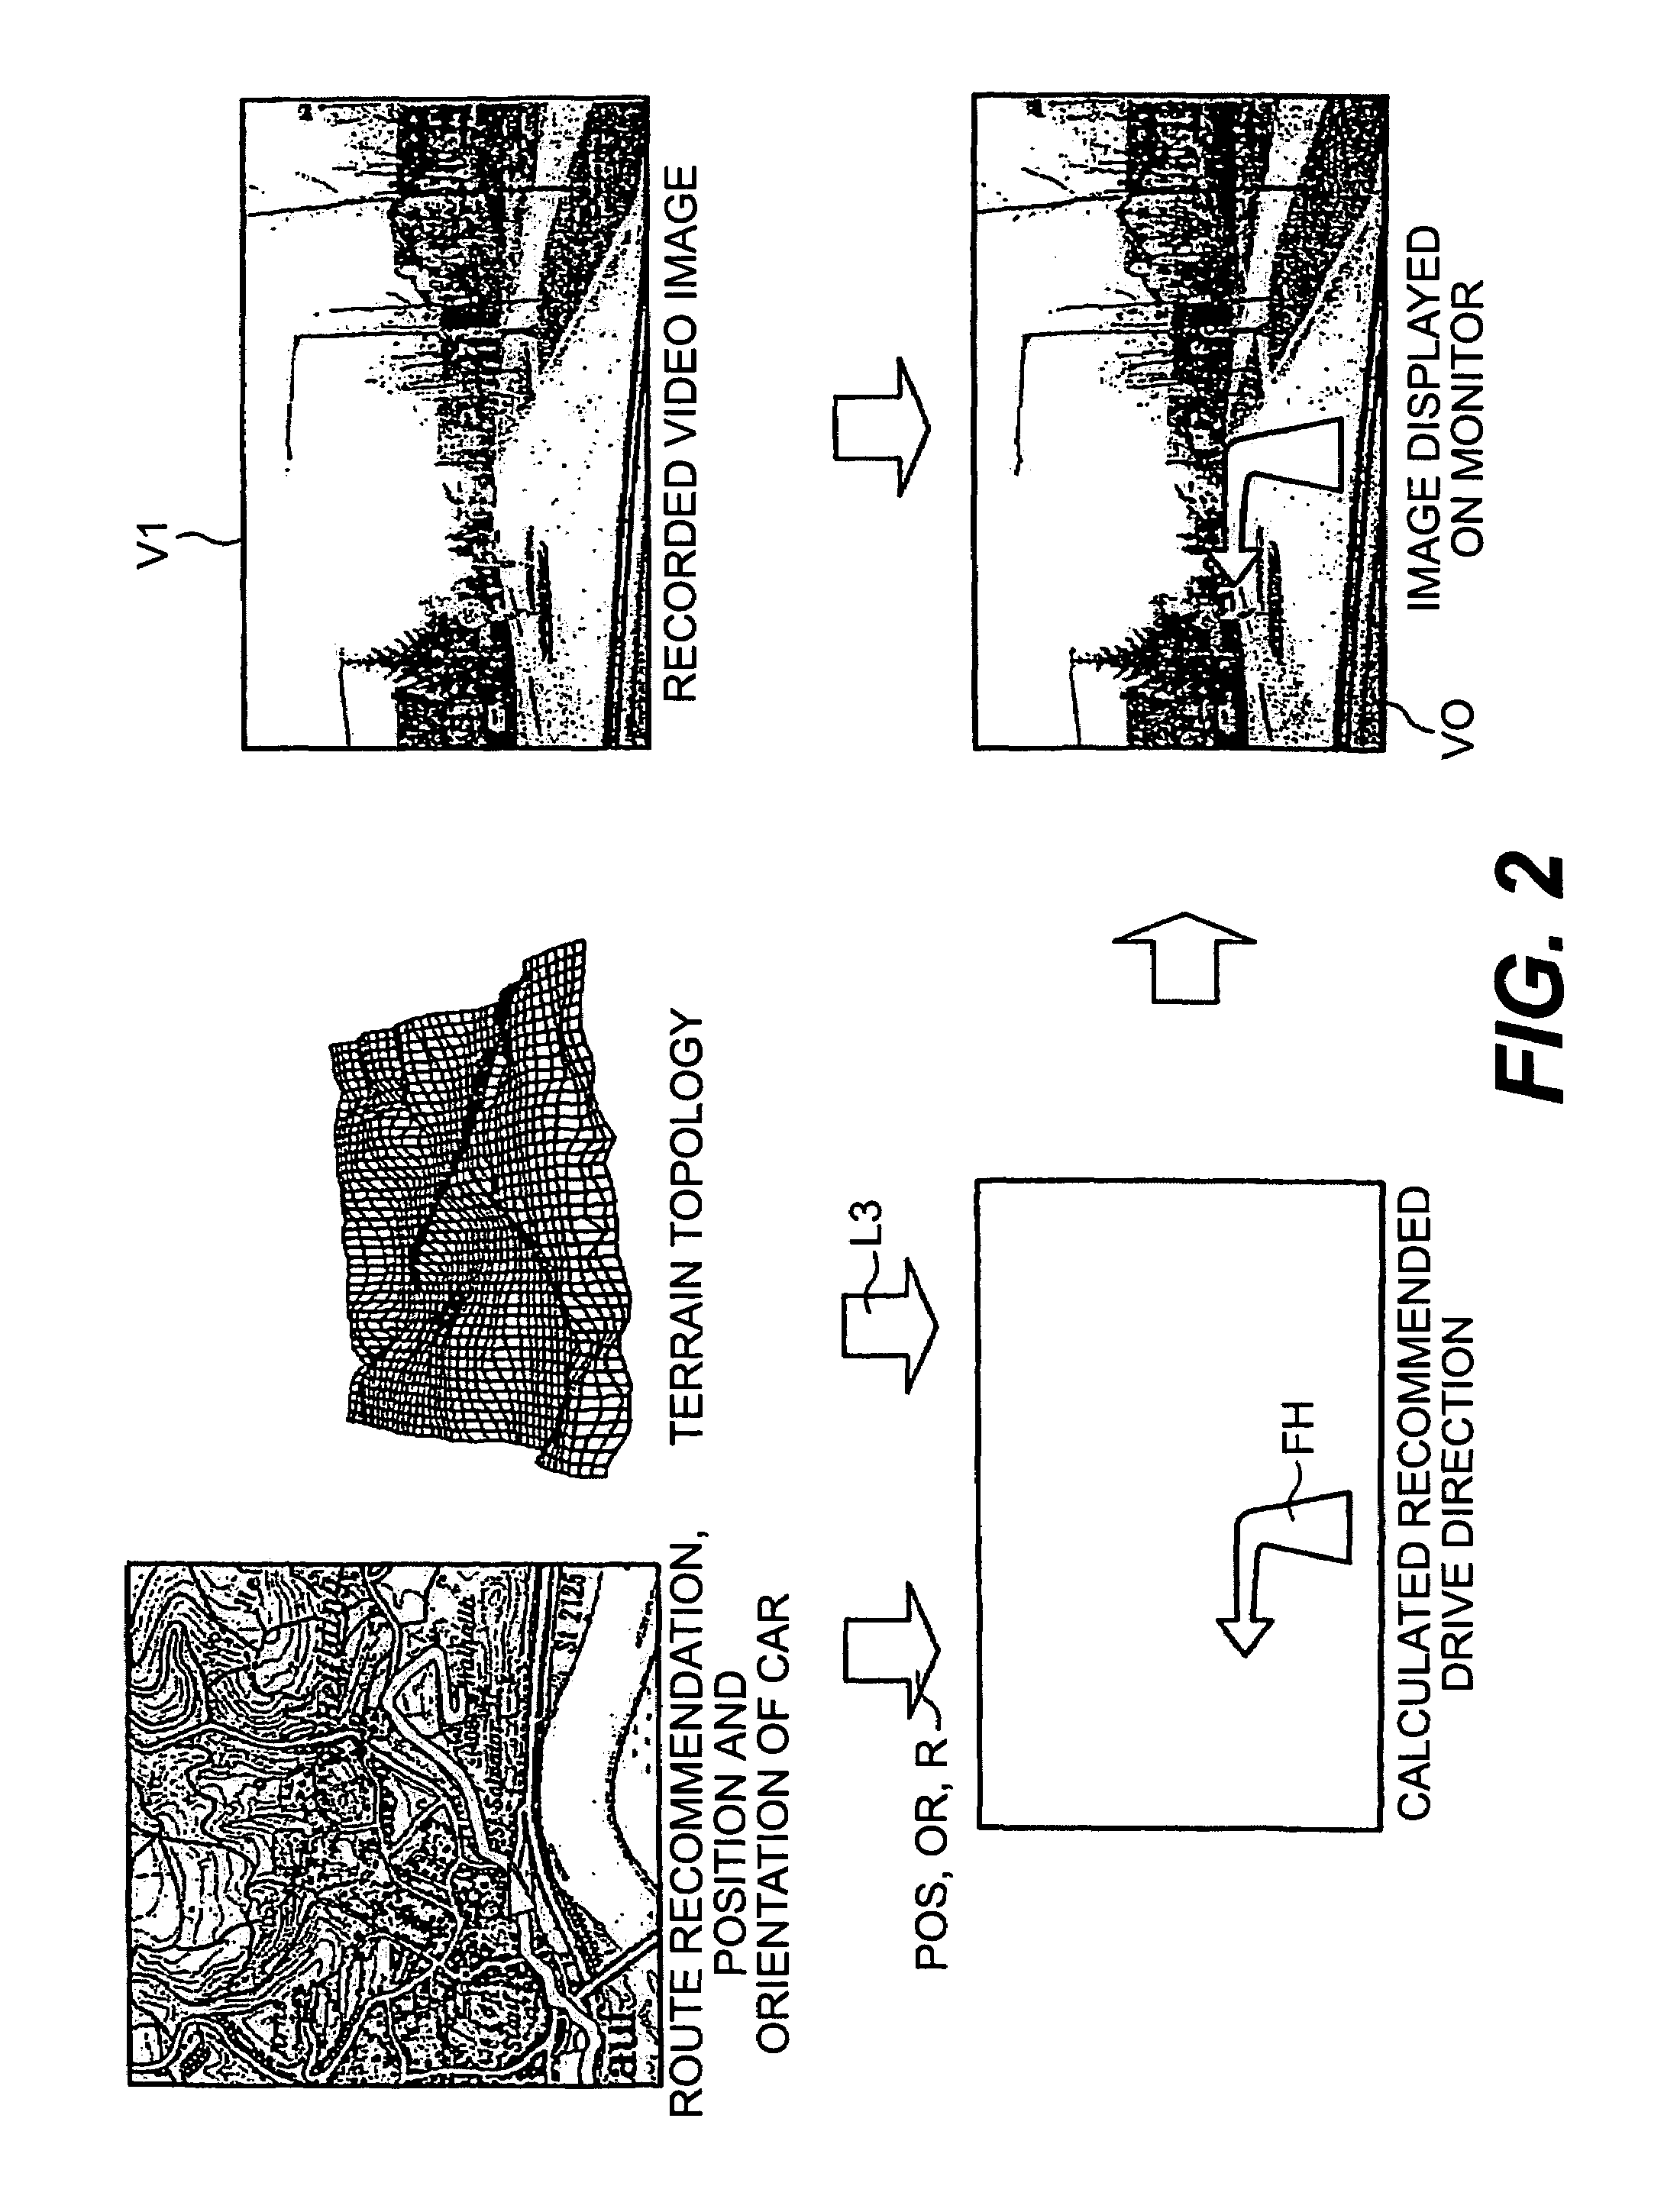 Method and device for displaying driving instructions, especially in car navigation systems